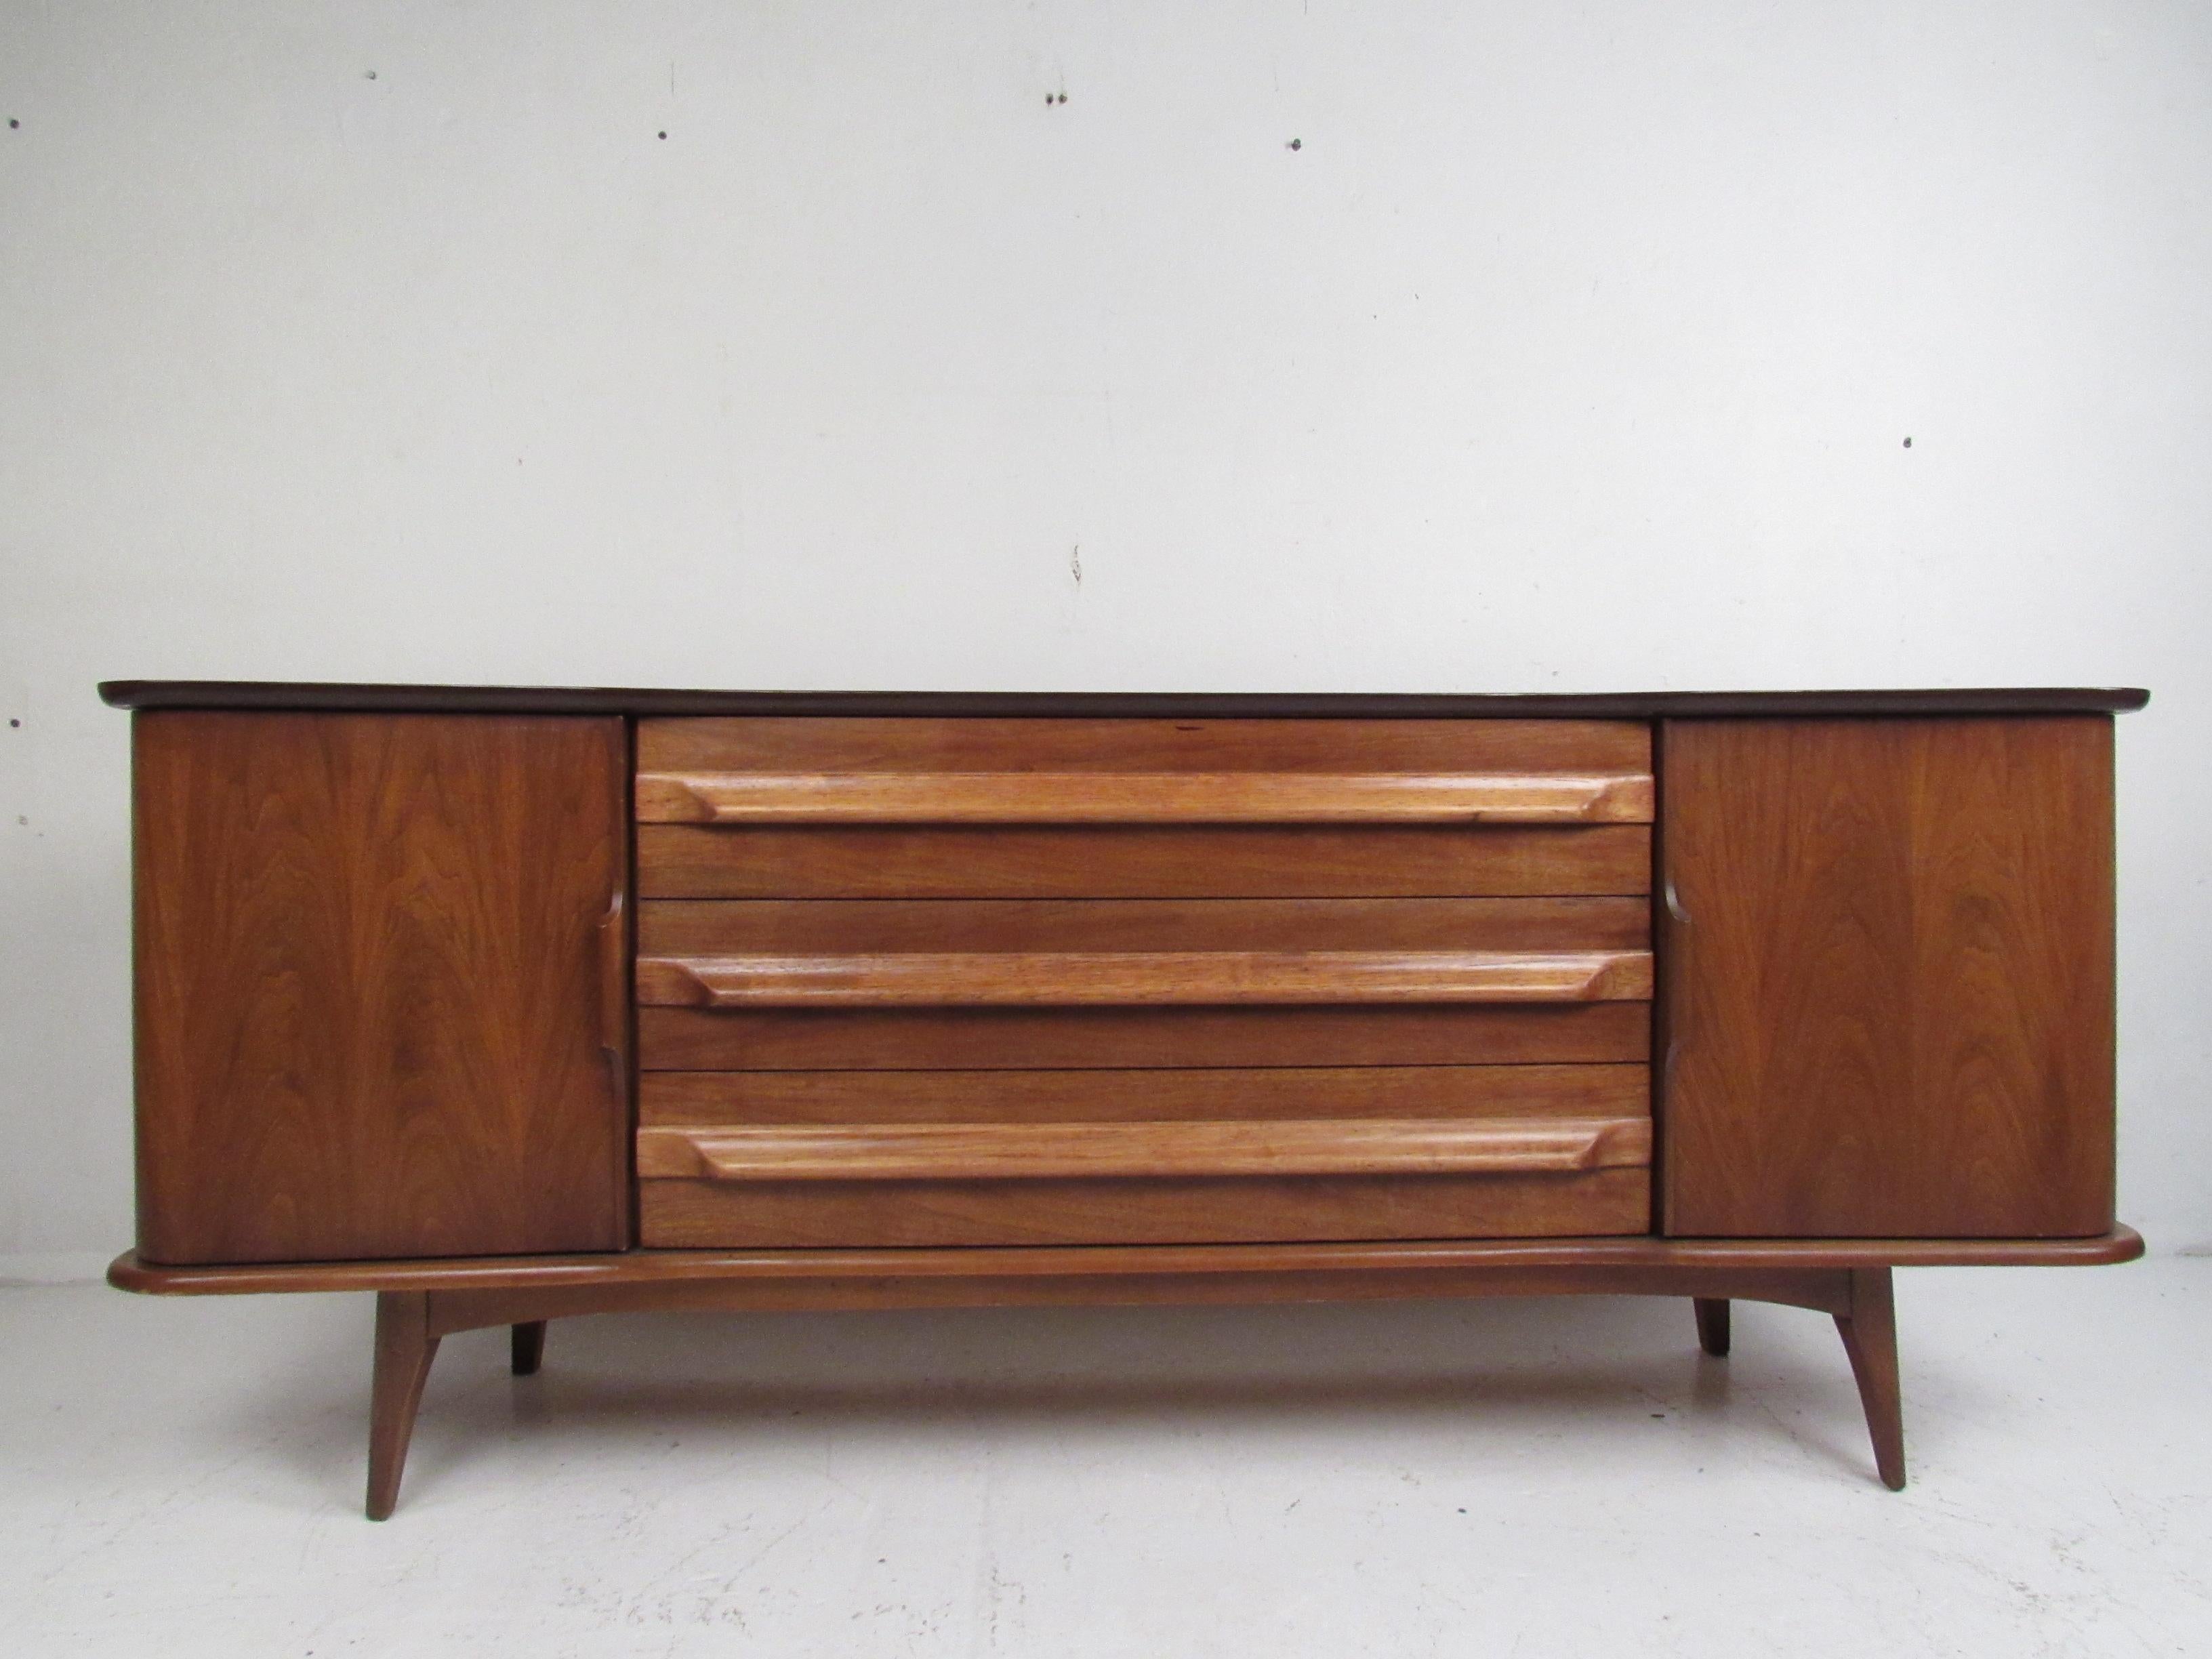 A vintage modern bedroom set that boasts a two-tone design with oak and walnut wood. This stunning pair offers plenty of room for storage within their many dovetailed drawers. A unique curved top, sculpted cabinet pulls, and splayed legs add to the